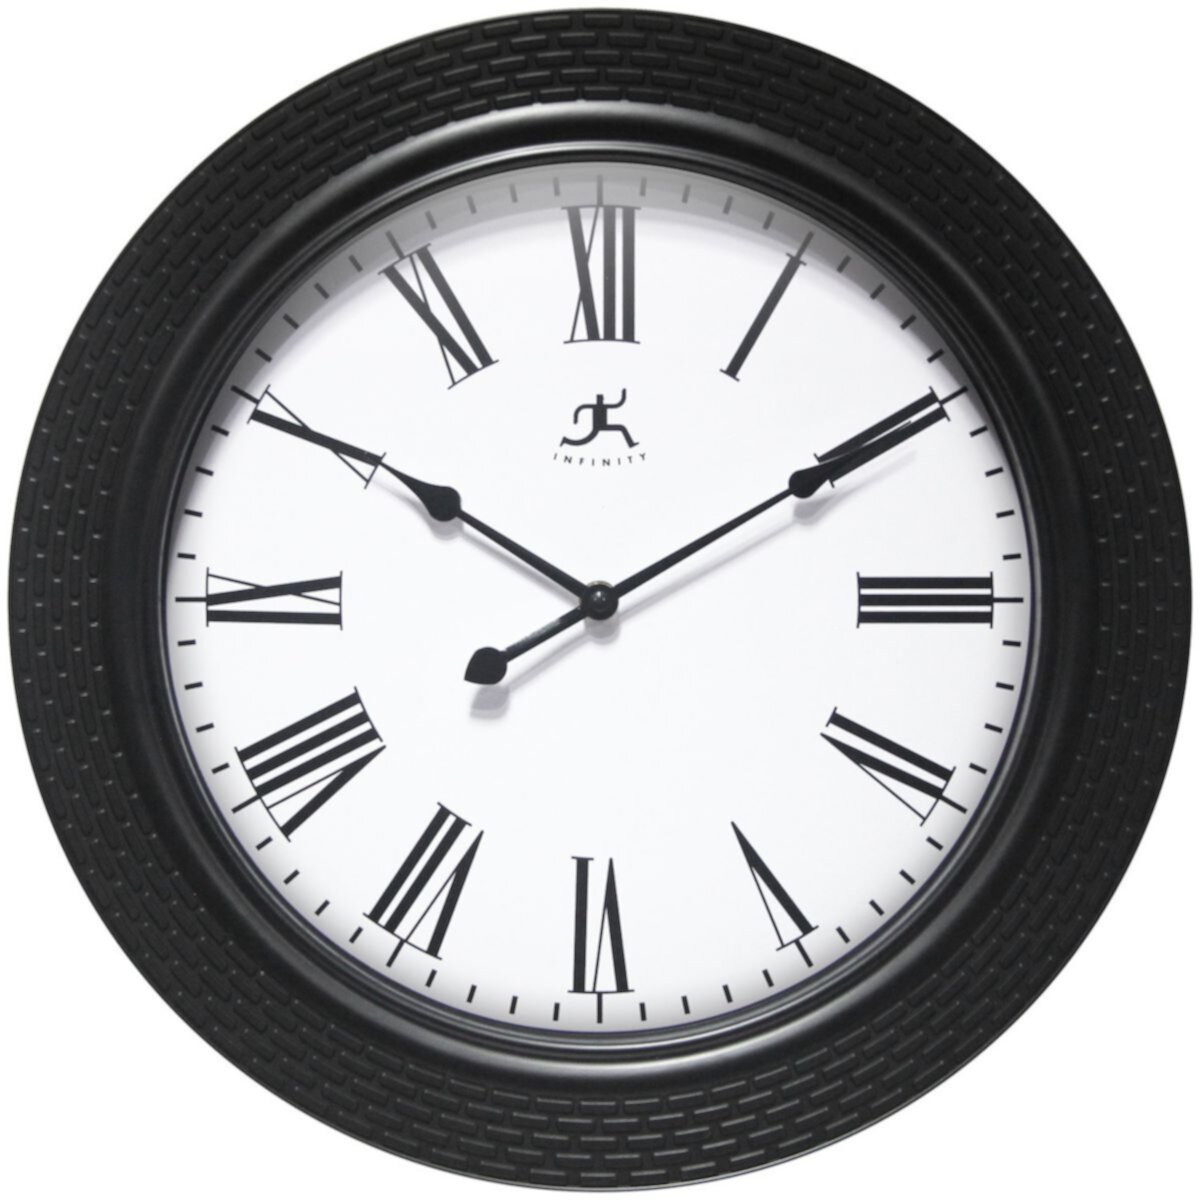 Infinity Instruments 16-in. Round Wall Clock with Roman Numerals Infinity Instruments